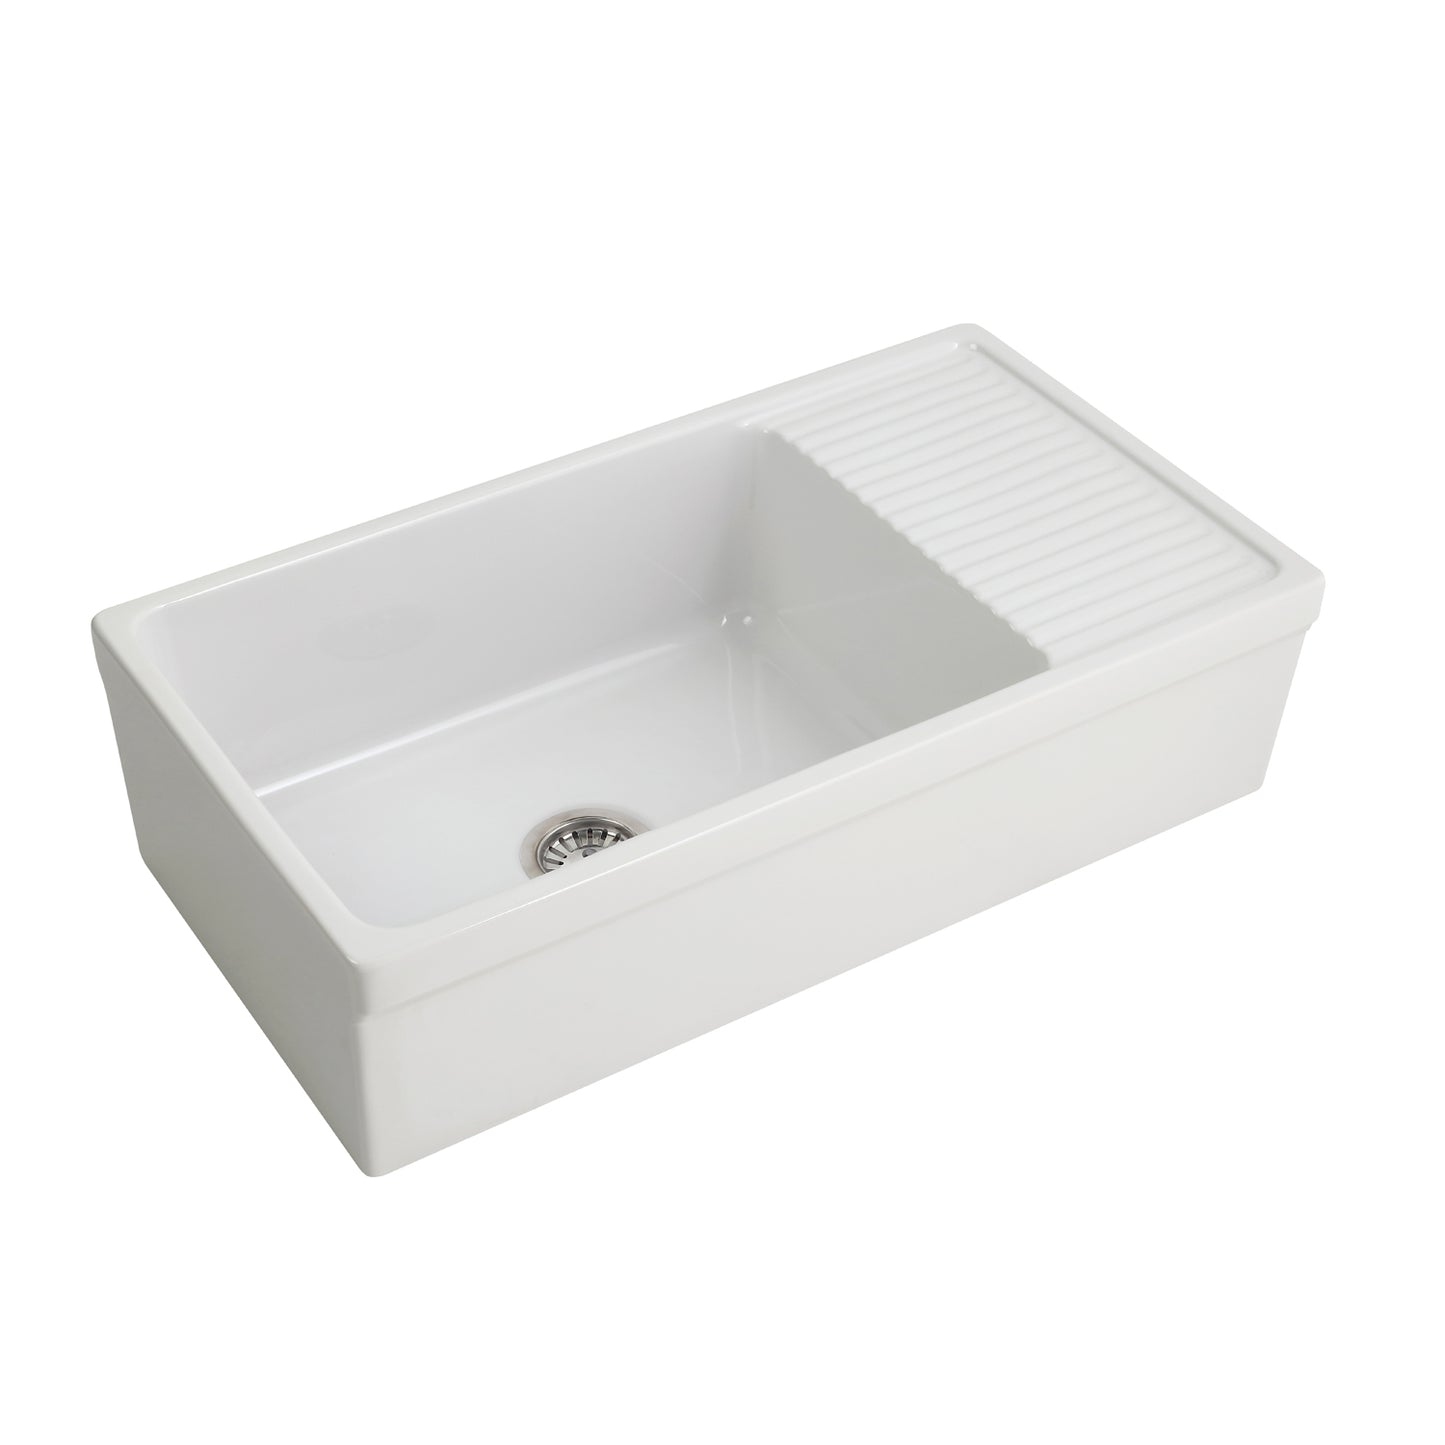 Inez 36" Single Bowl Fireclay Apron Kitchen Sink with Drainboard in White